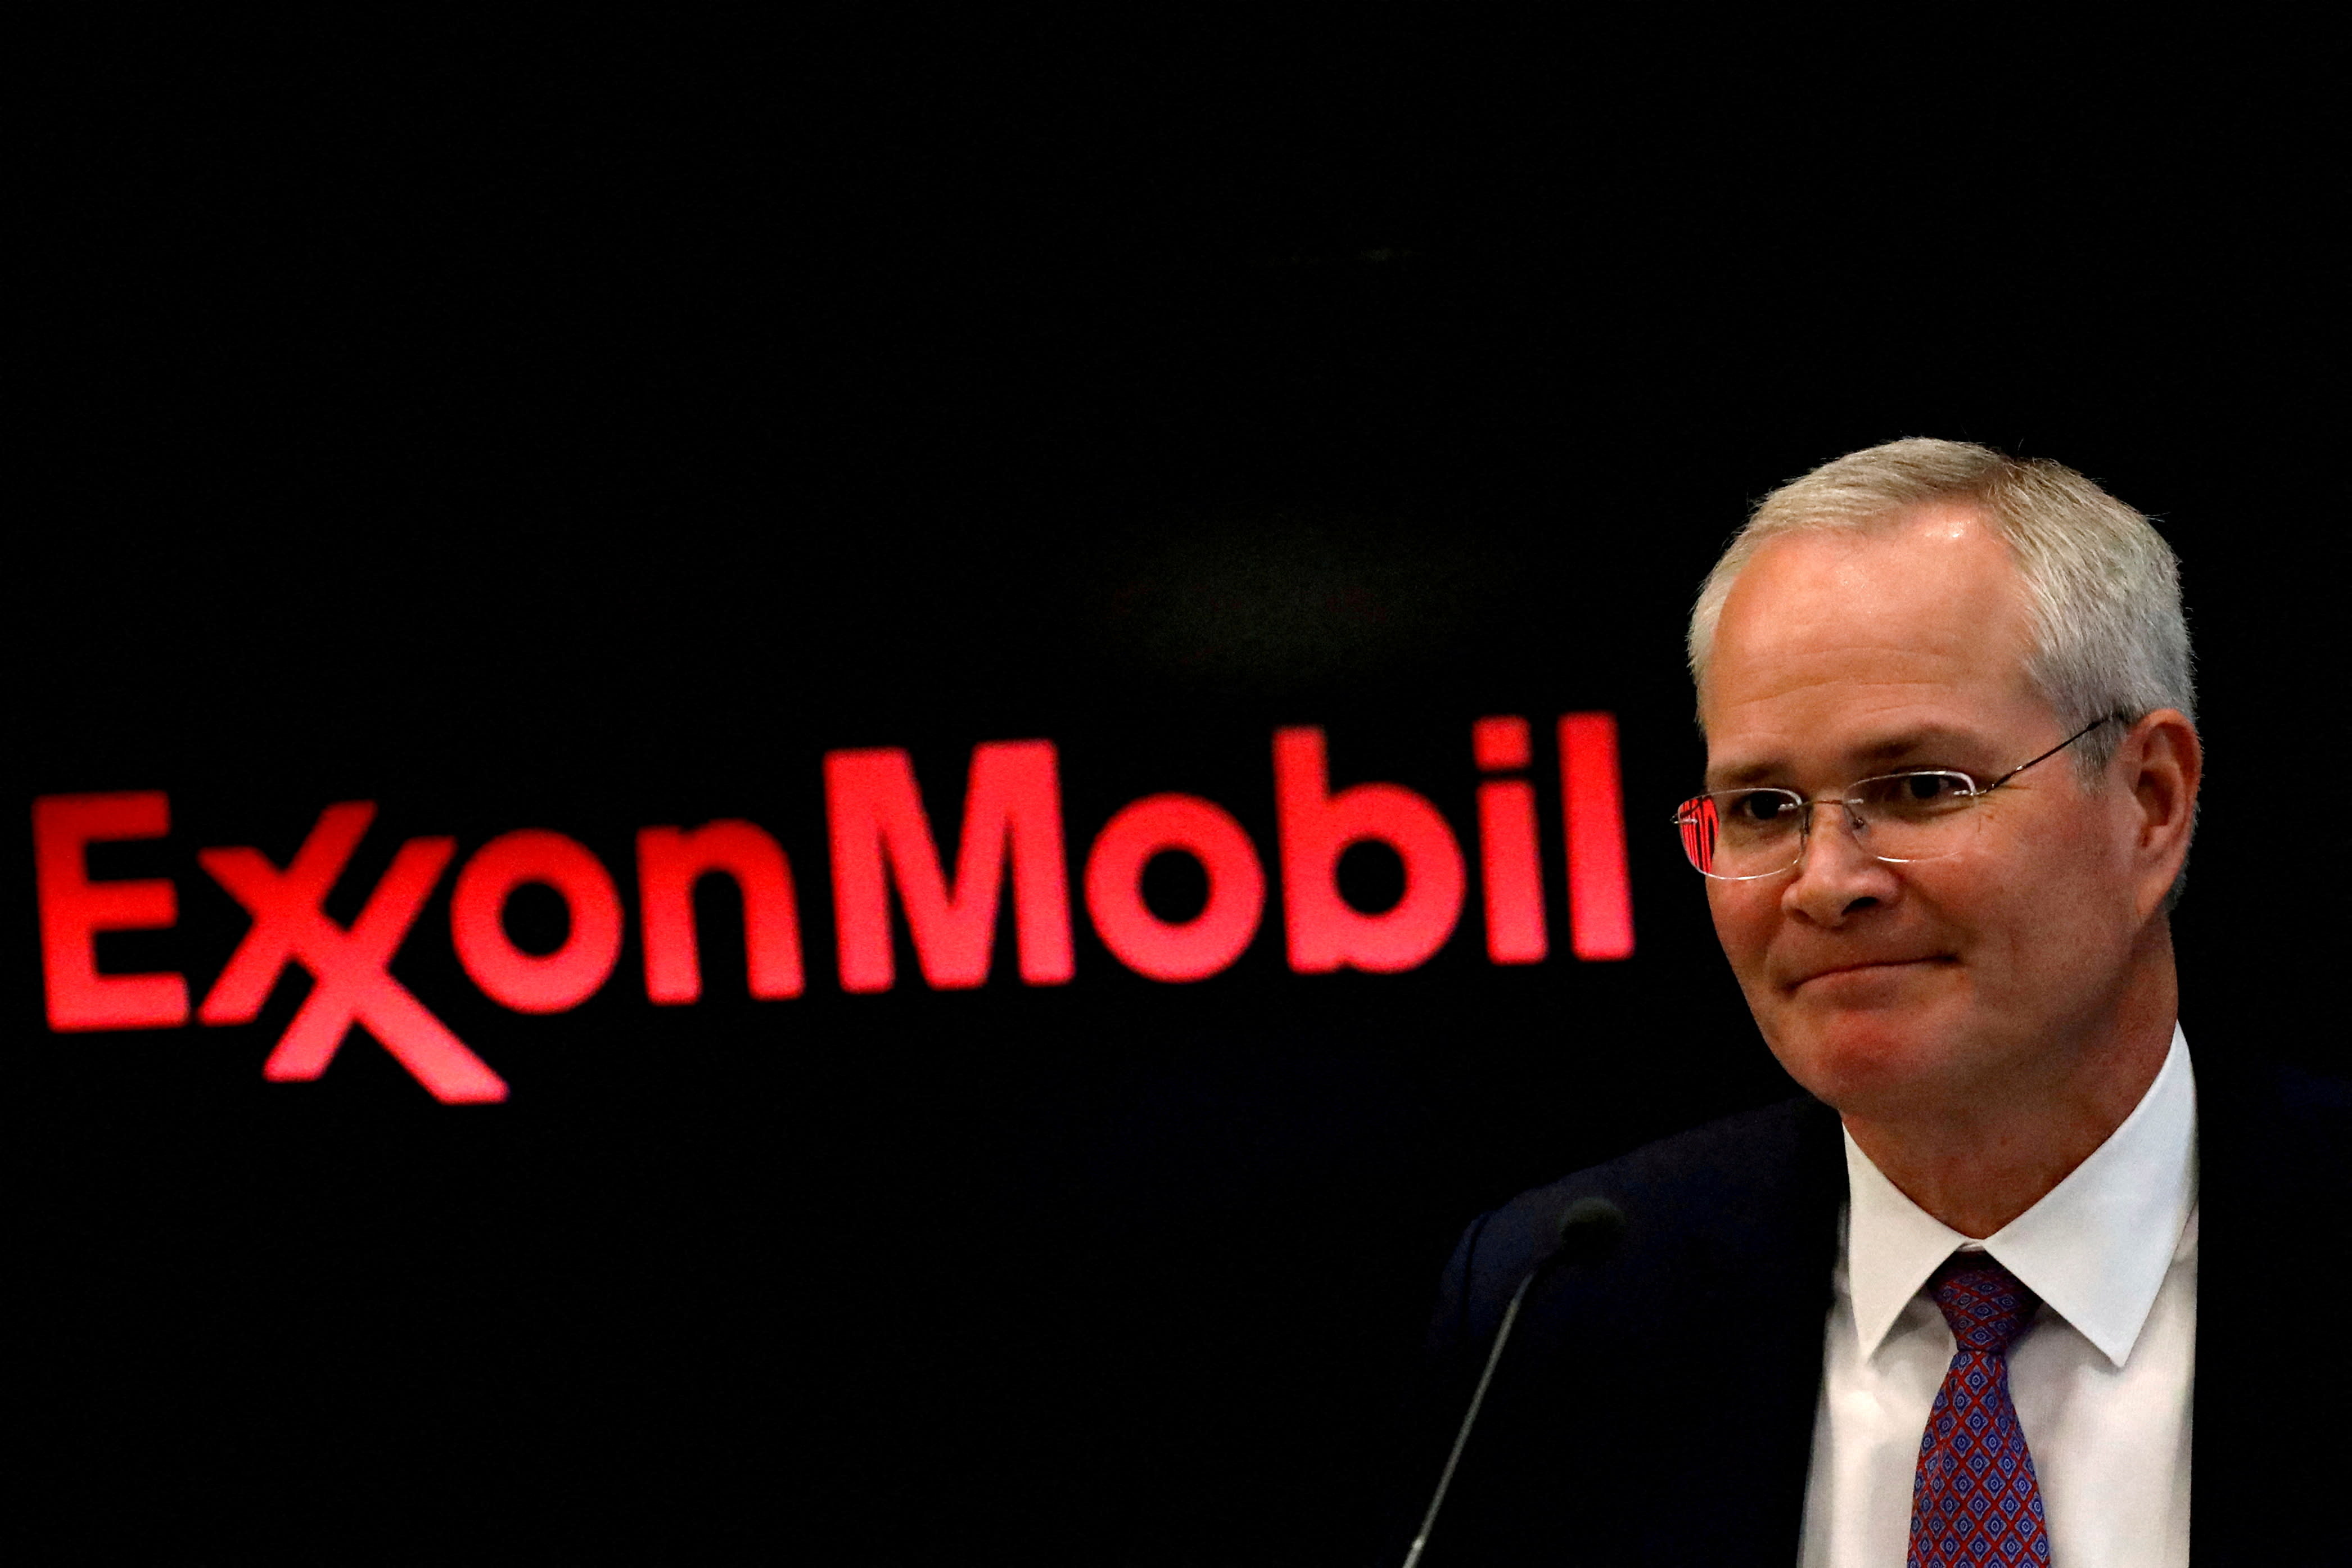 Exxon expects a significant increase in profits as a result of cost cuts, and will increase stock buybacks after the Pioneer deal closes